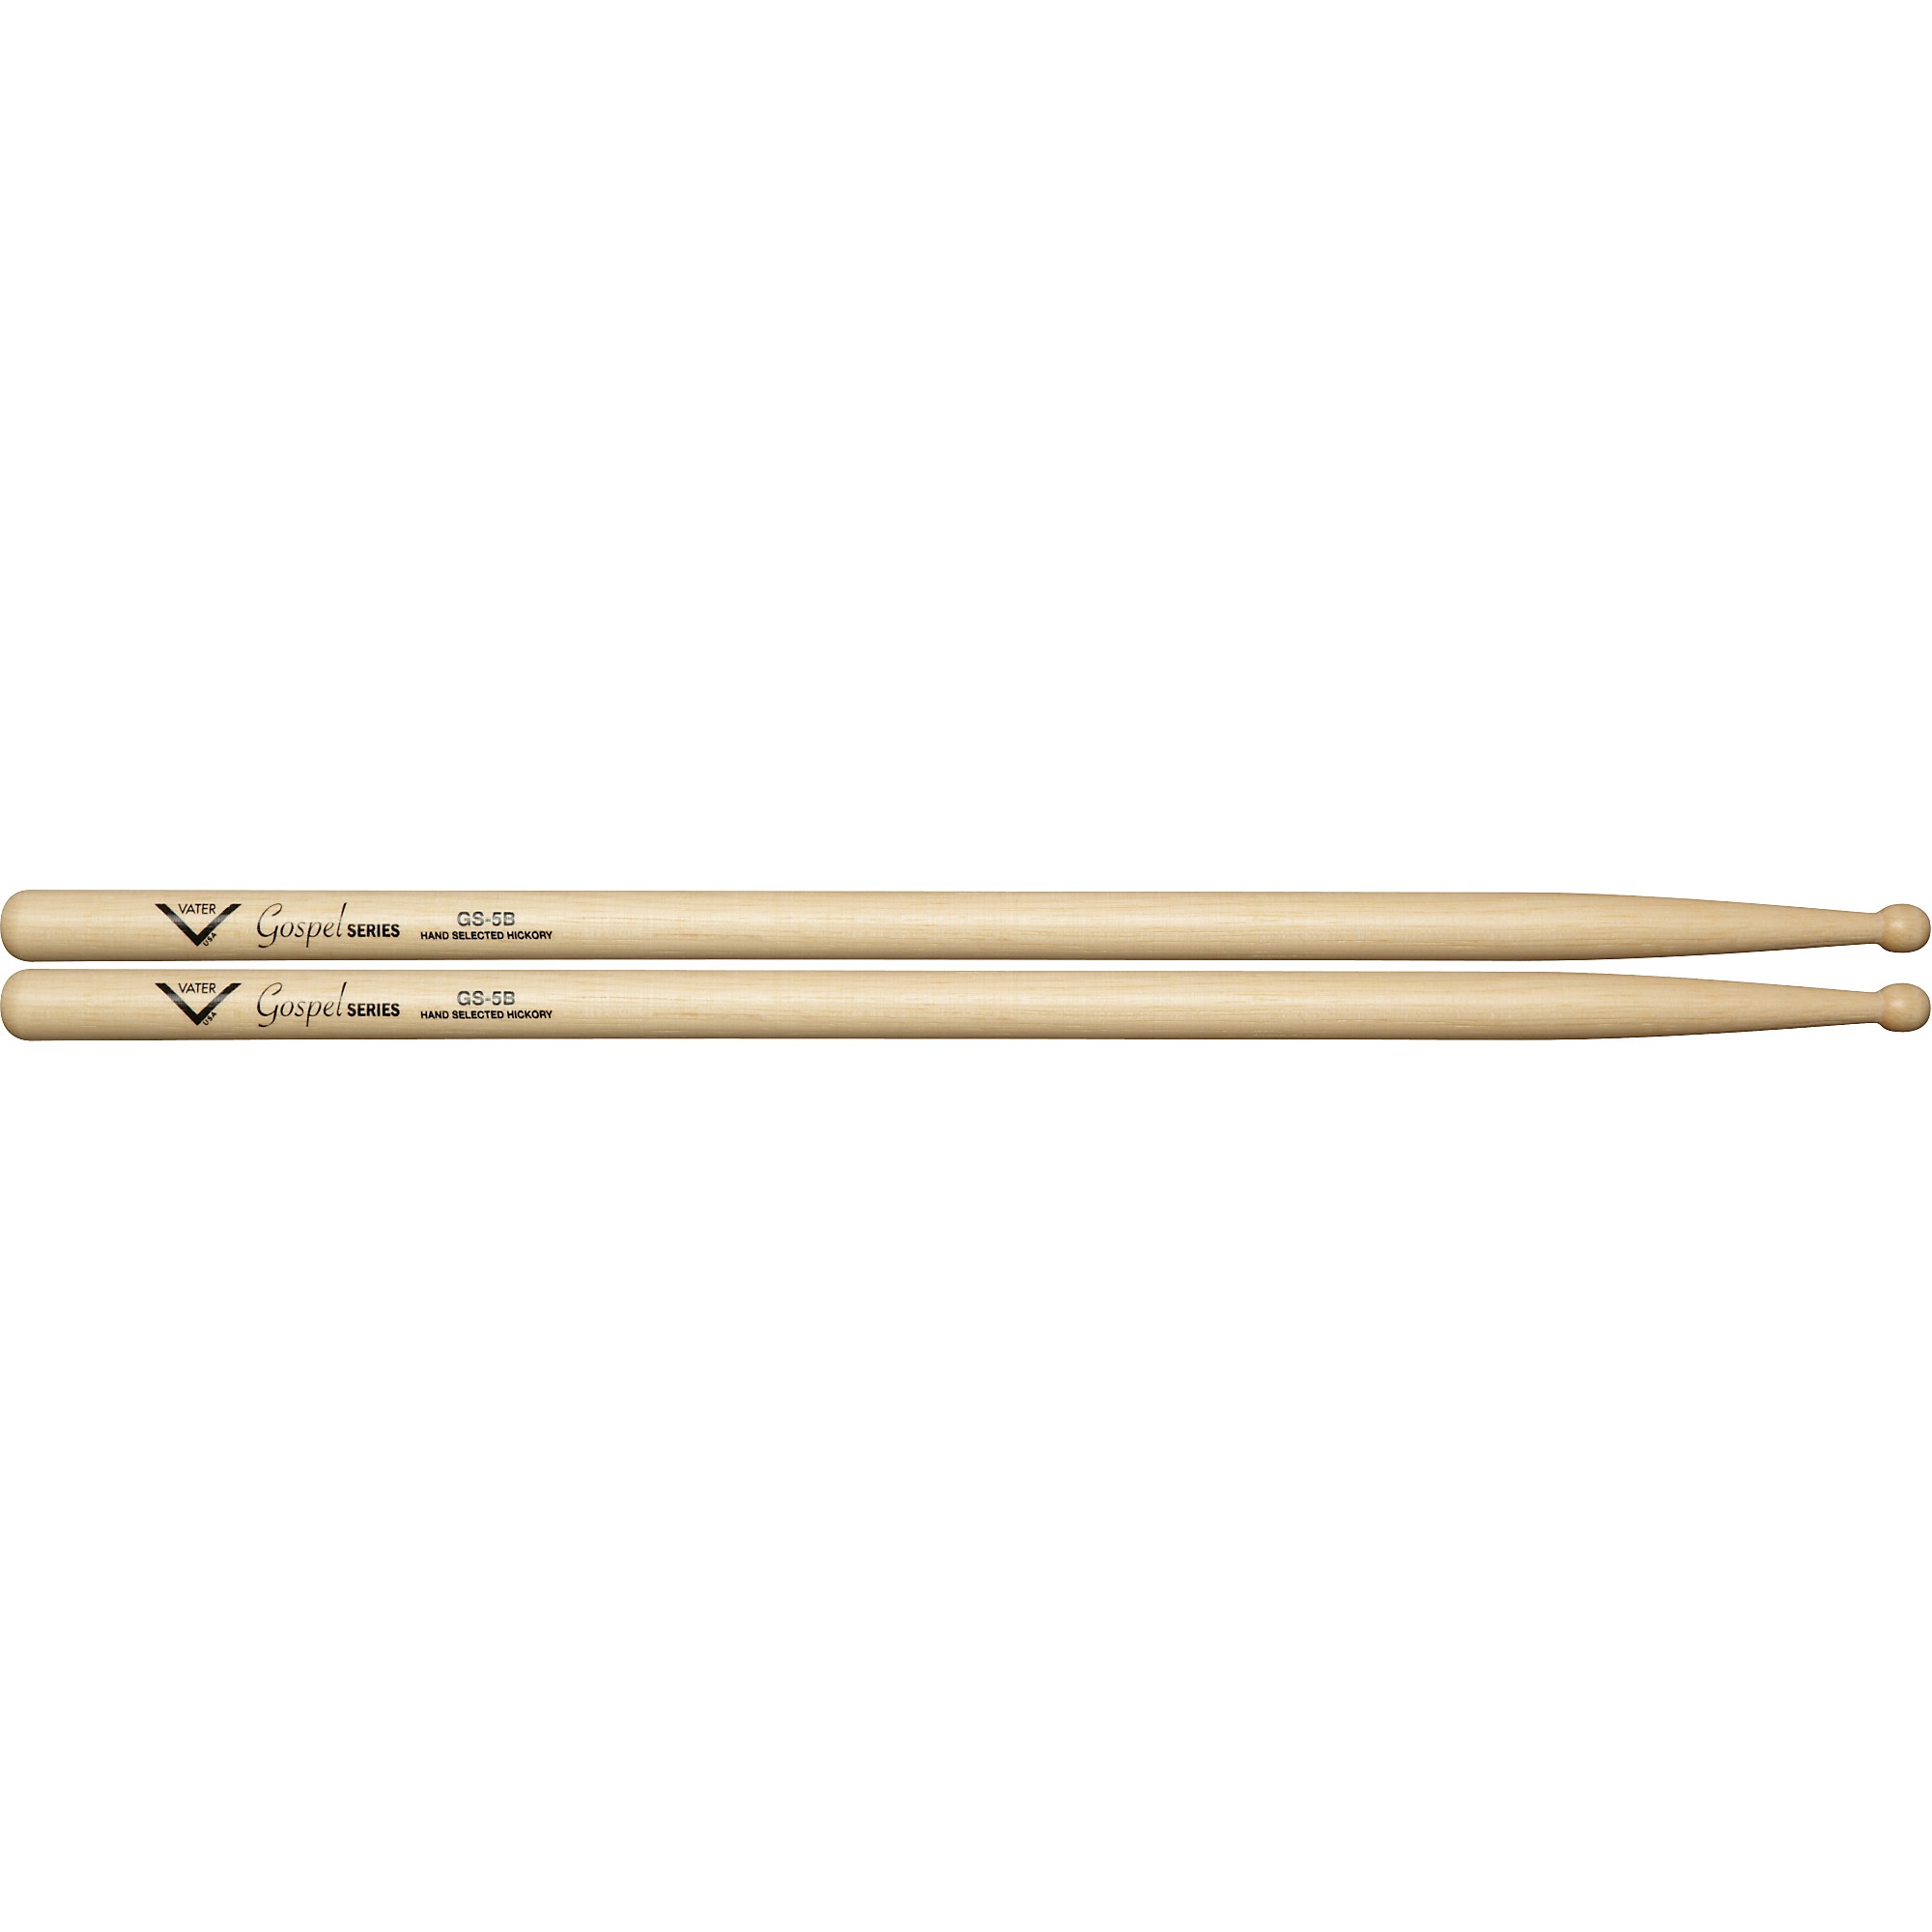 Economy Birch Wood 5B Drumsticks Brand New and Bagged 